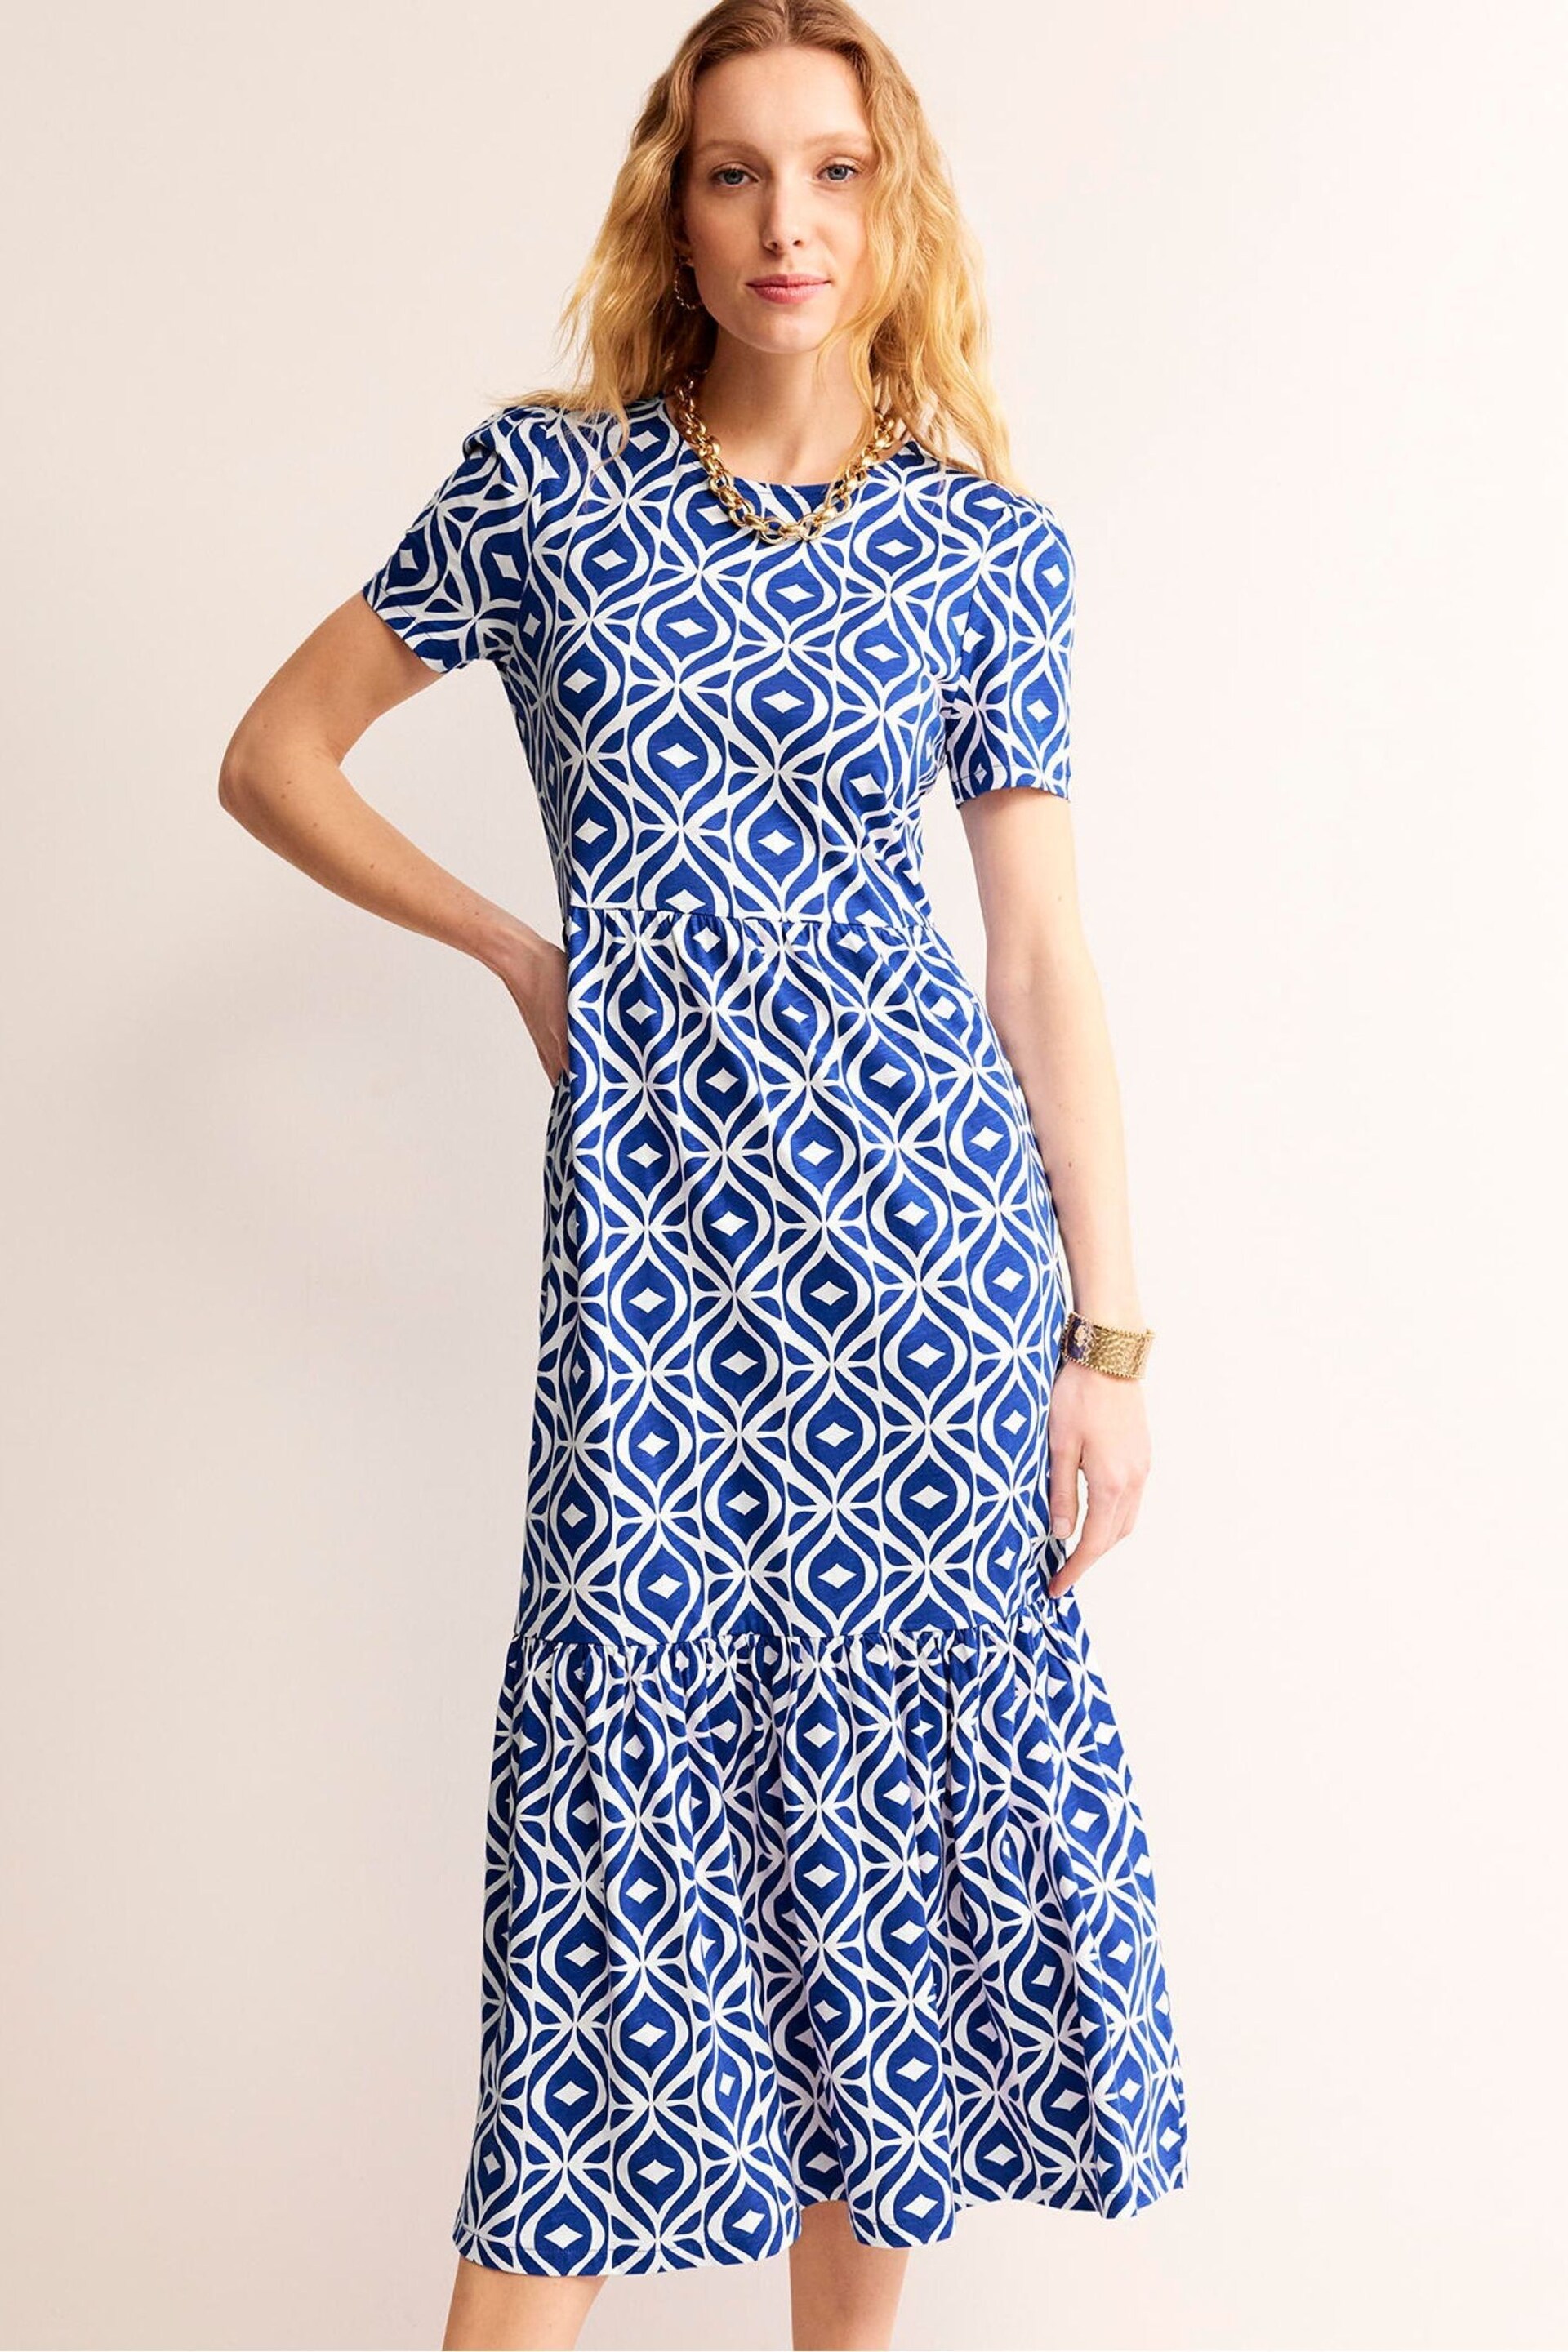 Boden Blue Emma Tiered Jersey Midi Dress - Image 5 of 6